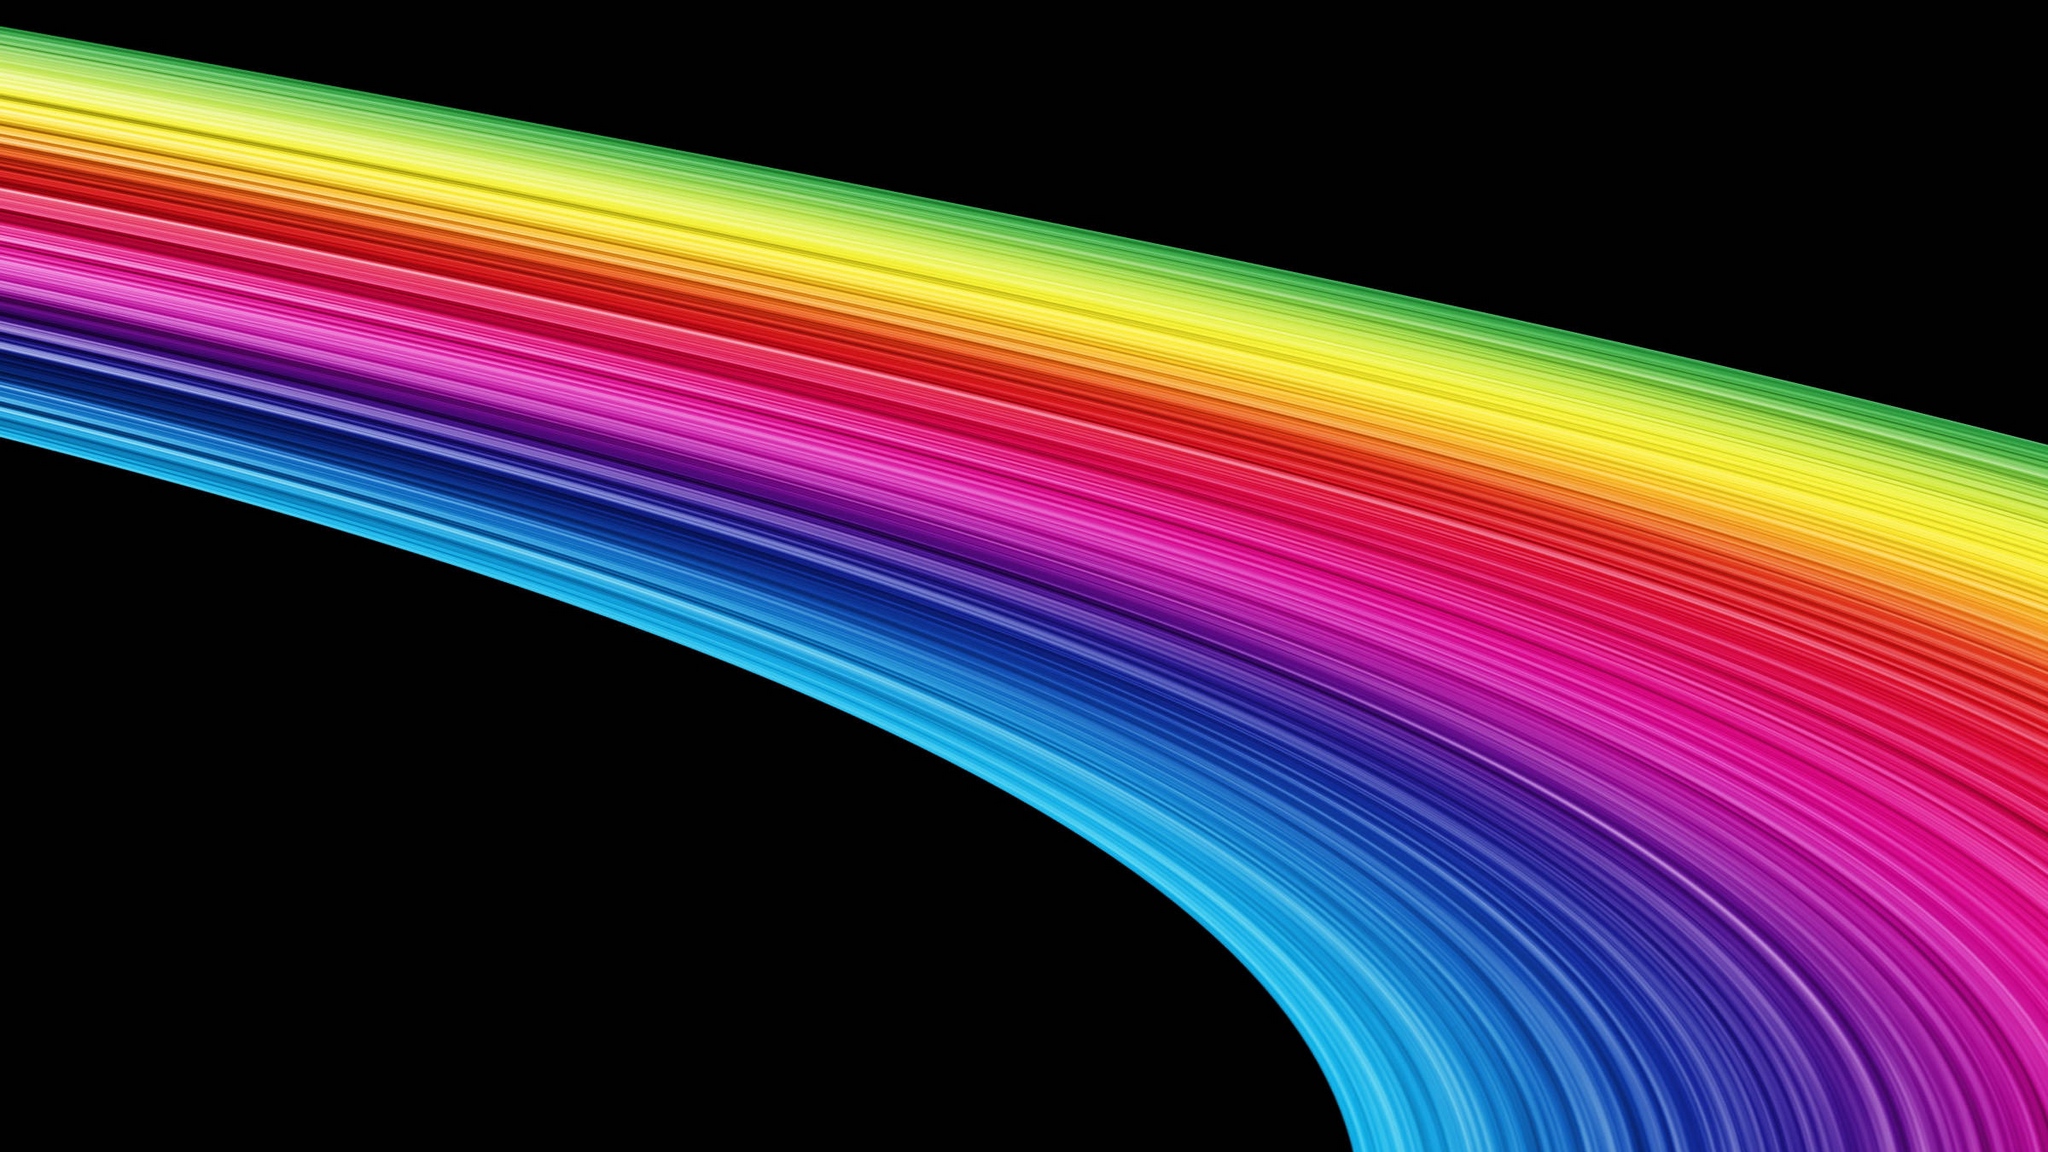 Wallpaper Lines, Abstract, Rainbow, Black Background - HD Wallpaper 